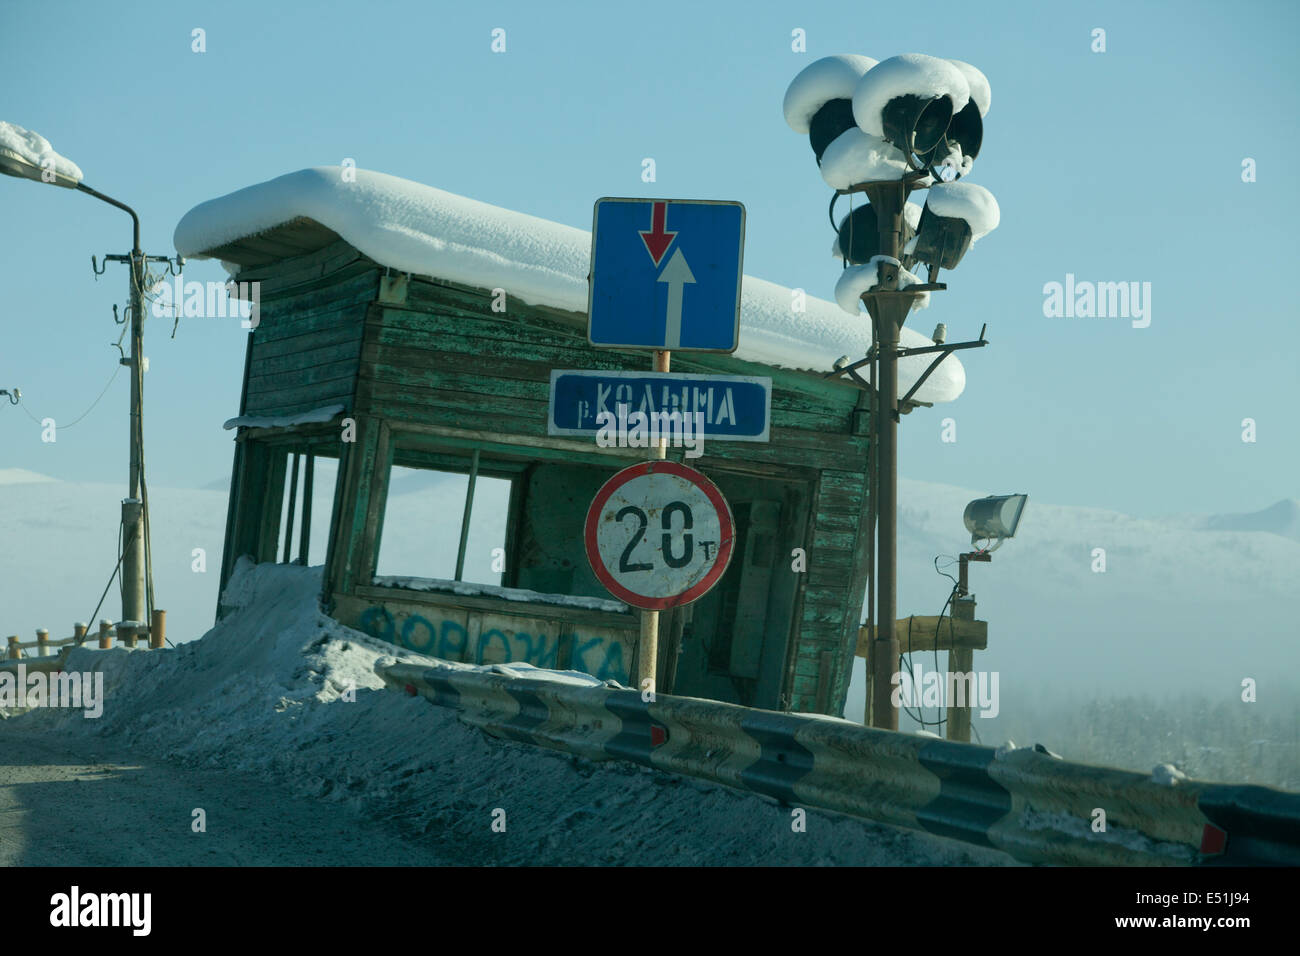 Snow covered wooden Russian signal box road signs Stock Photo